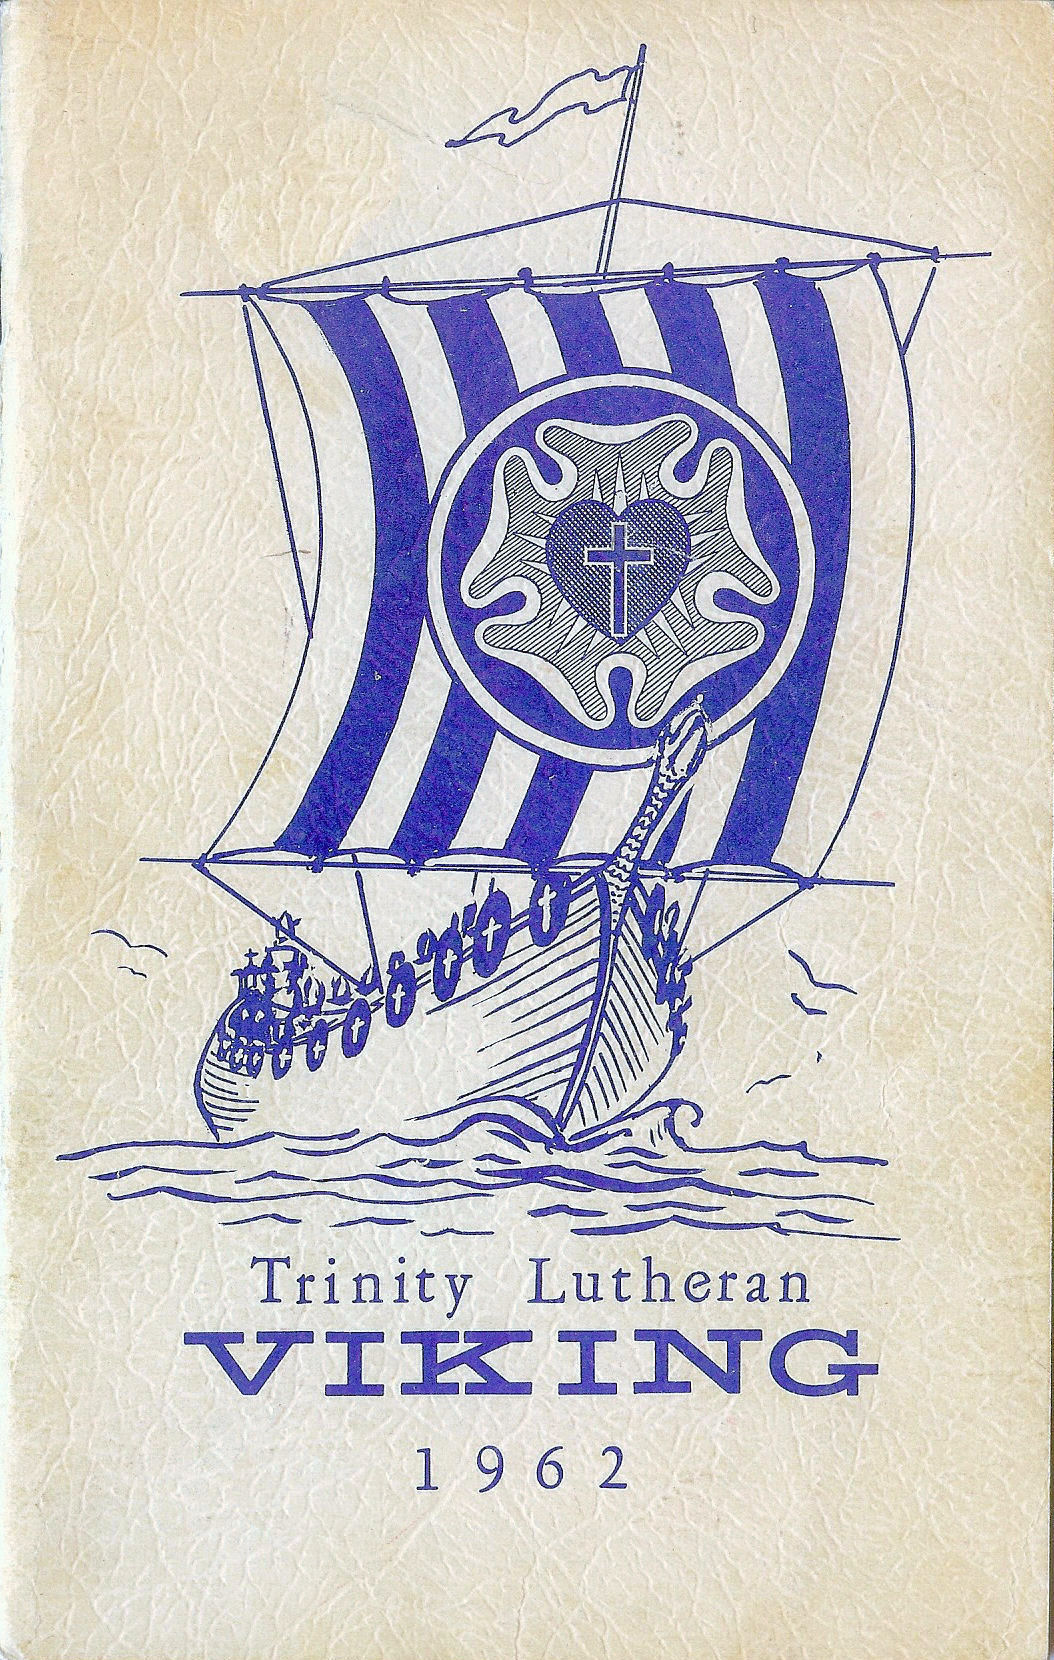 61-62 Yearbook Cover